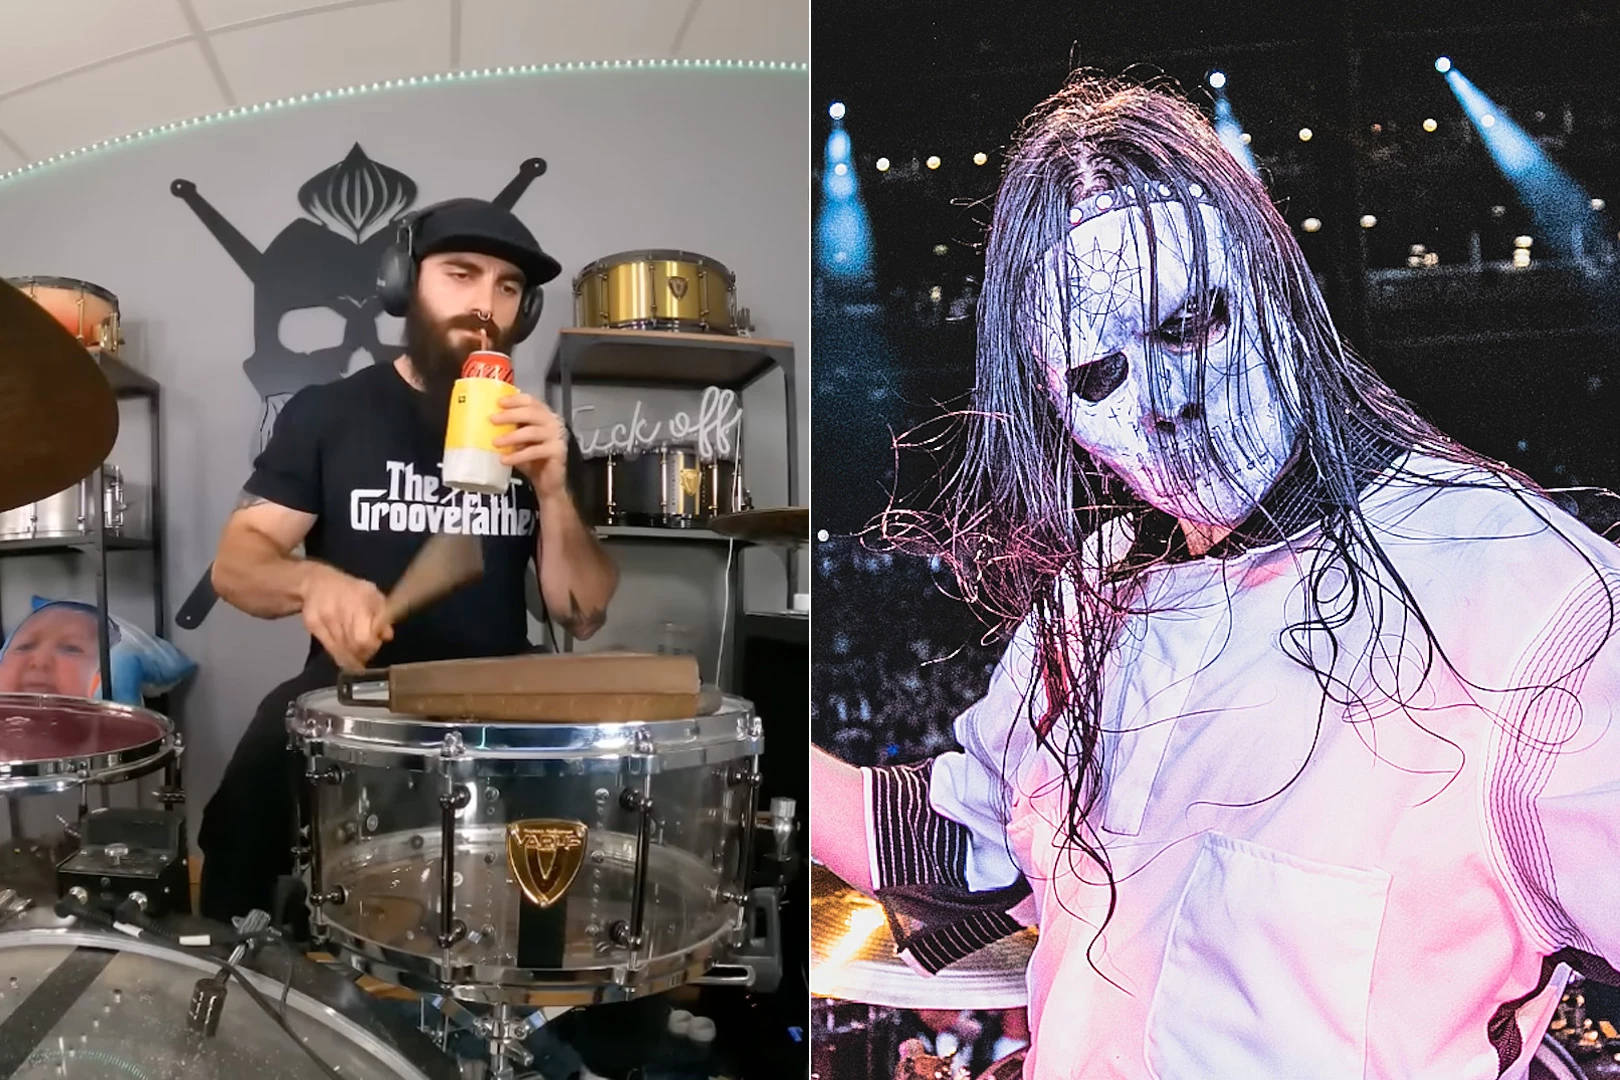 Drummer Nails Slipknot Cover With One Hand, Sips Soda With Other